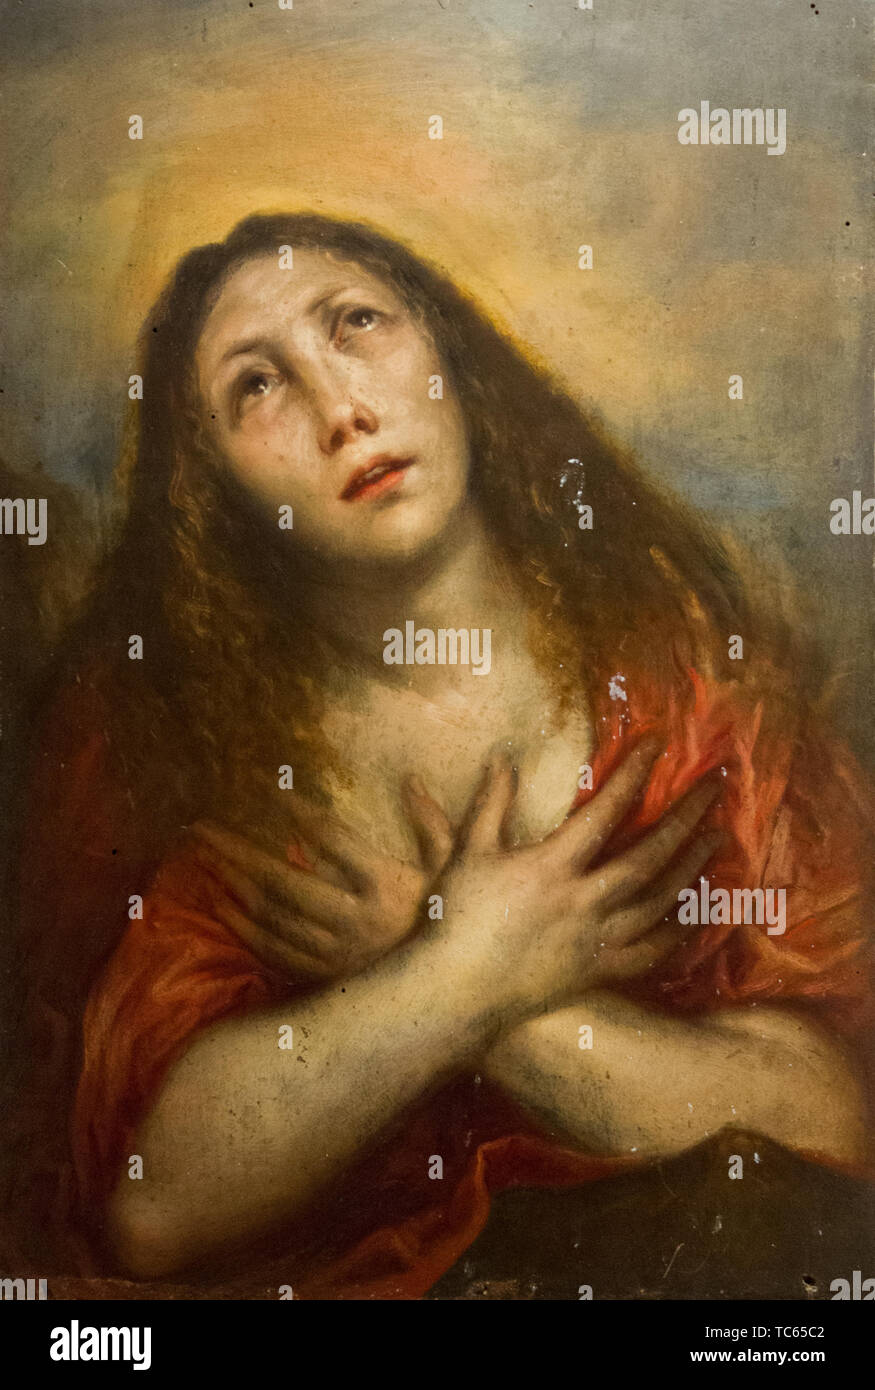 The painting 'Maddalena penitente' - the penitent Mary Magdalene - by Francesco Cairo (1607-1665). Currently in Castello Visconteo. Stock Photo